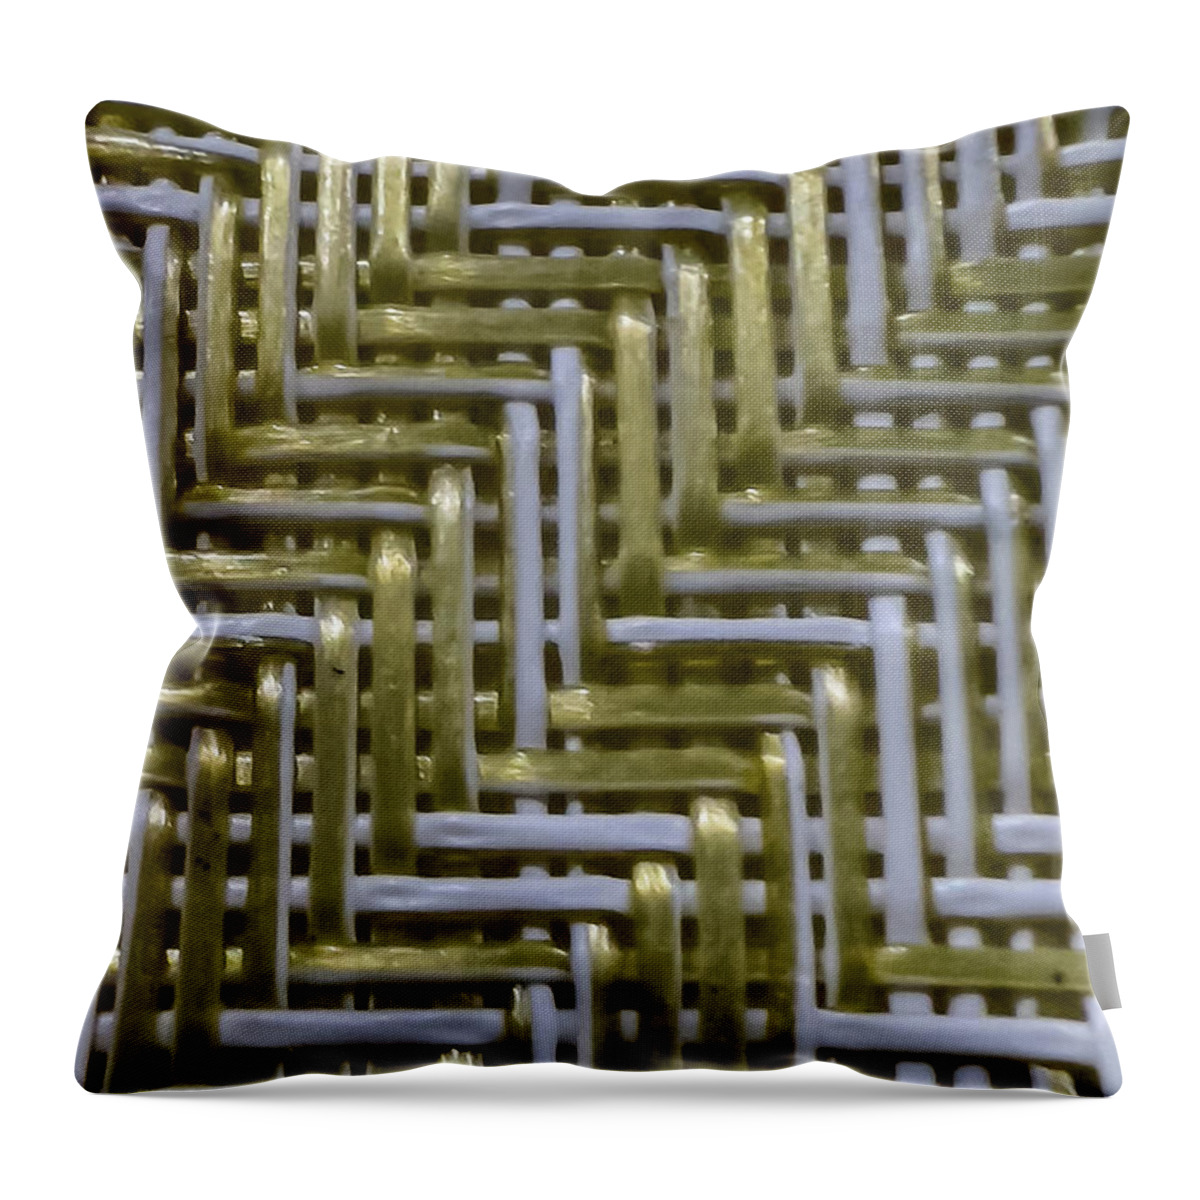 Abstract Art Throw Pillow featuring the photograph Straw Abstract by Ron Roberts